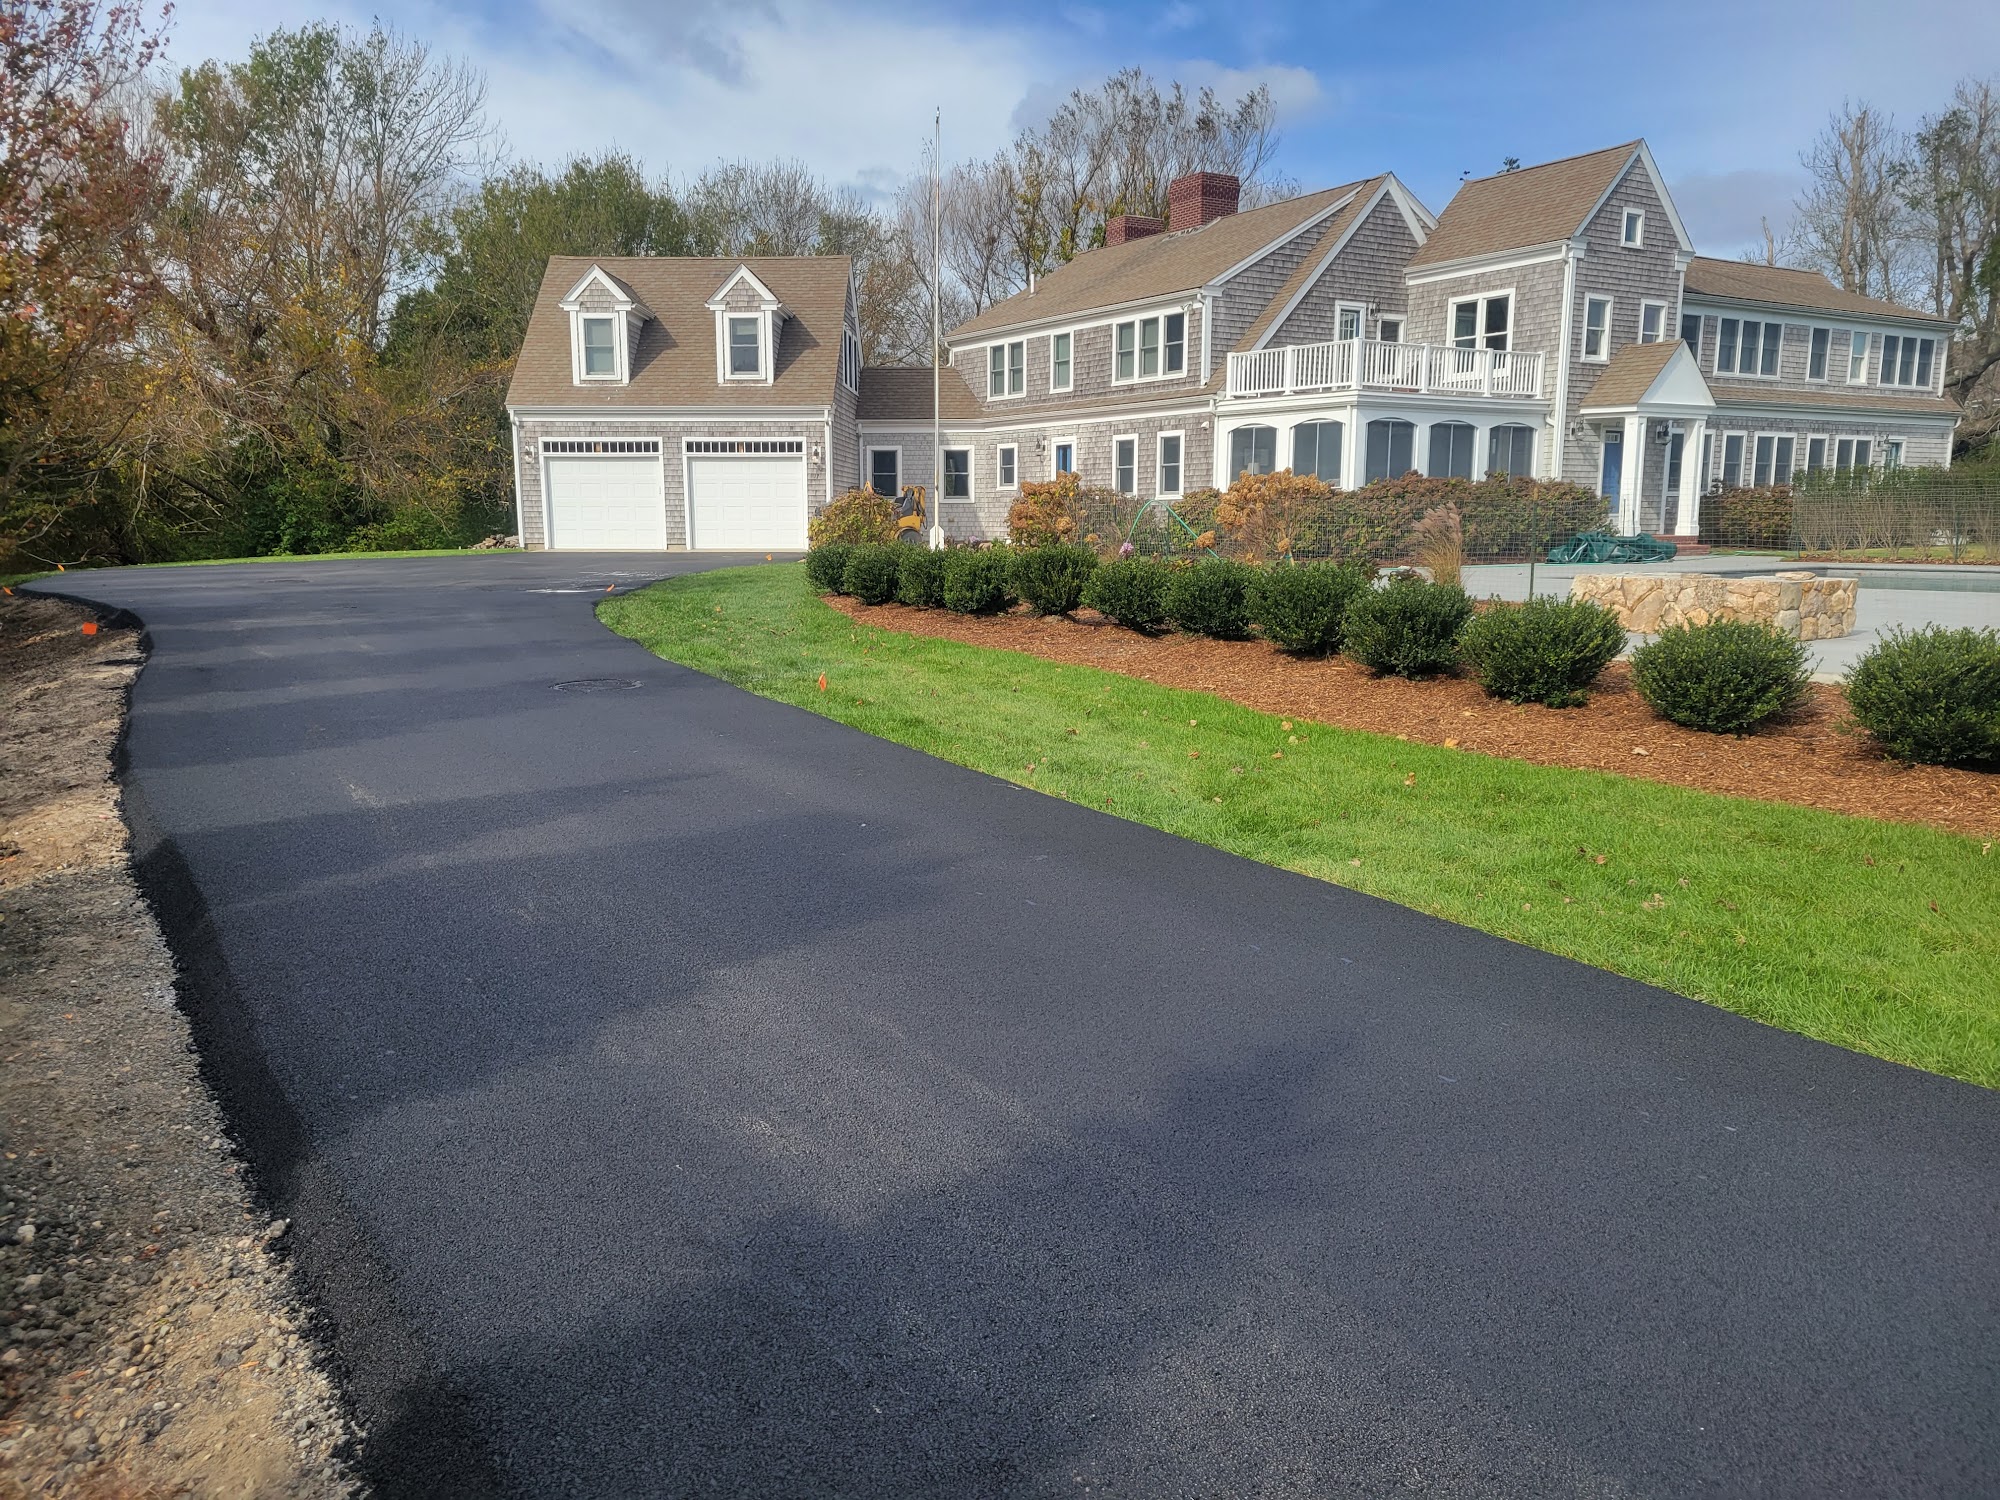 RS Superior Sealcoating and Paving 54 Witchwood Rd, South Yarmouth Massachusetts 02664